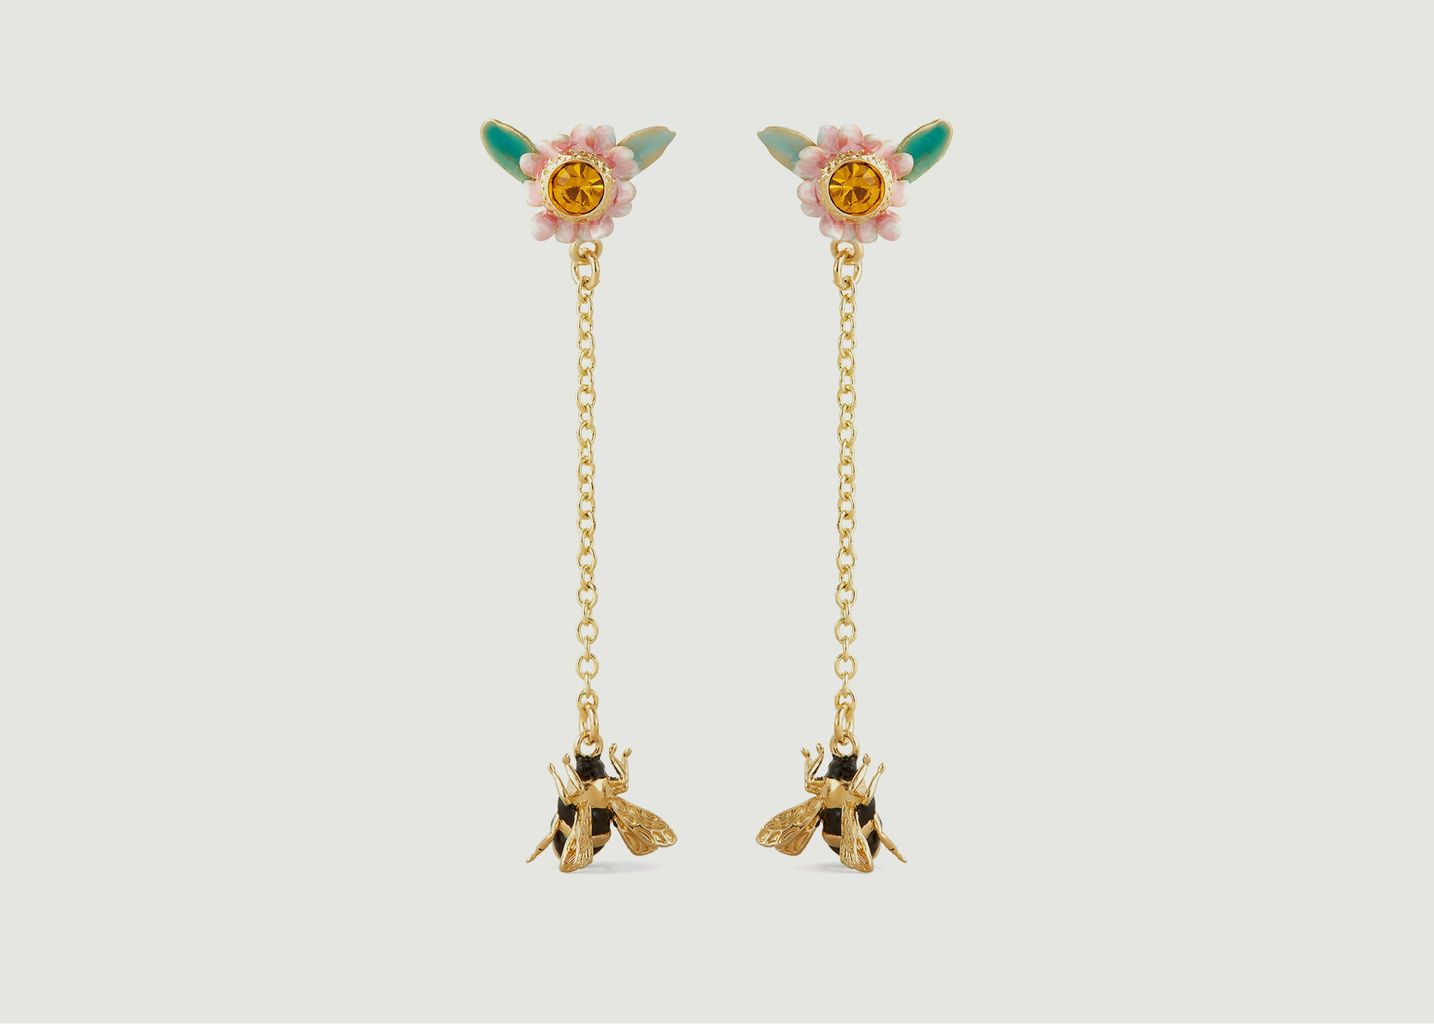 Flower and bee chain pendant earrings - Les Néréides